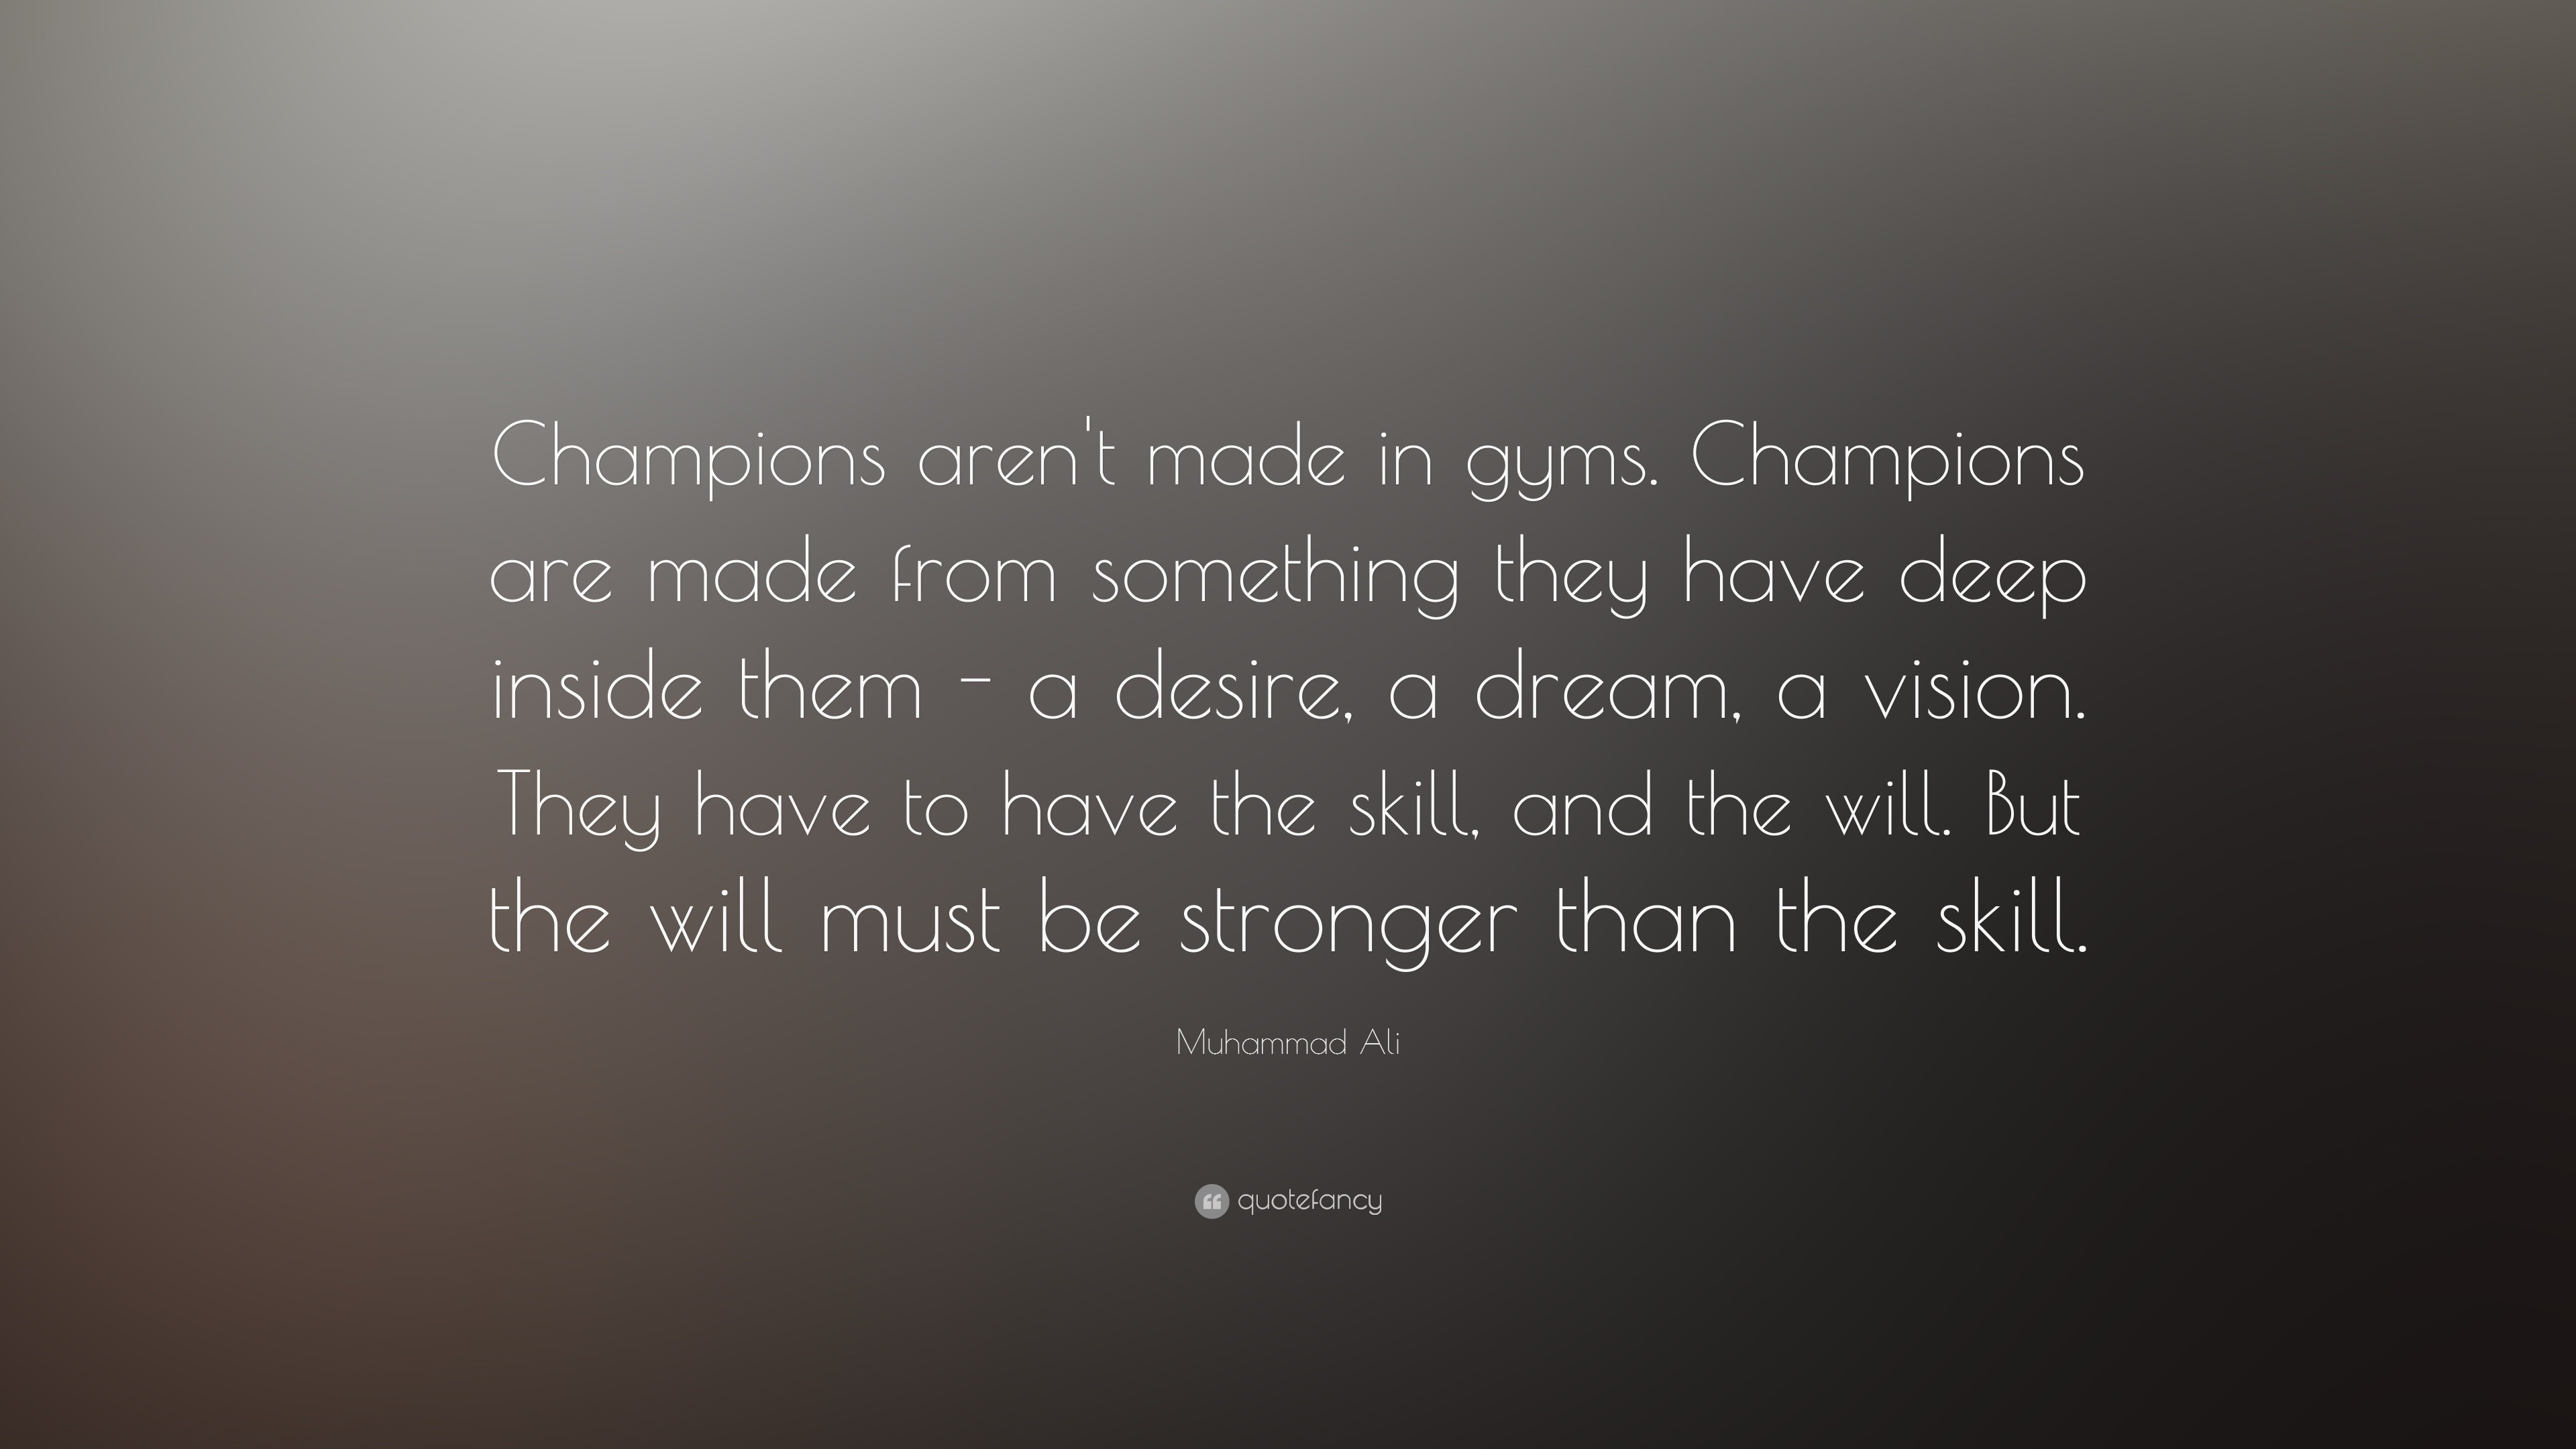 3840x2160 Muhammad Ali Quote: “Champions aren't made in gyms. Champions are made